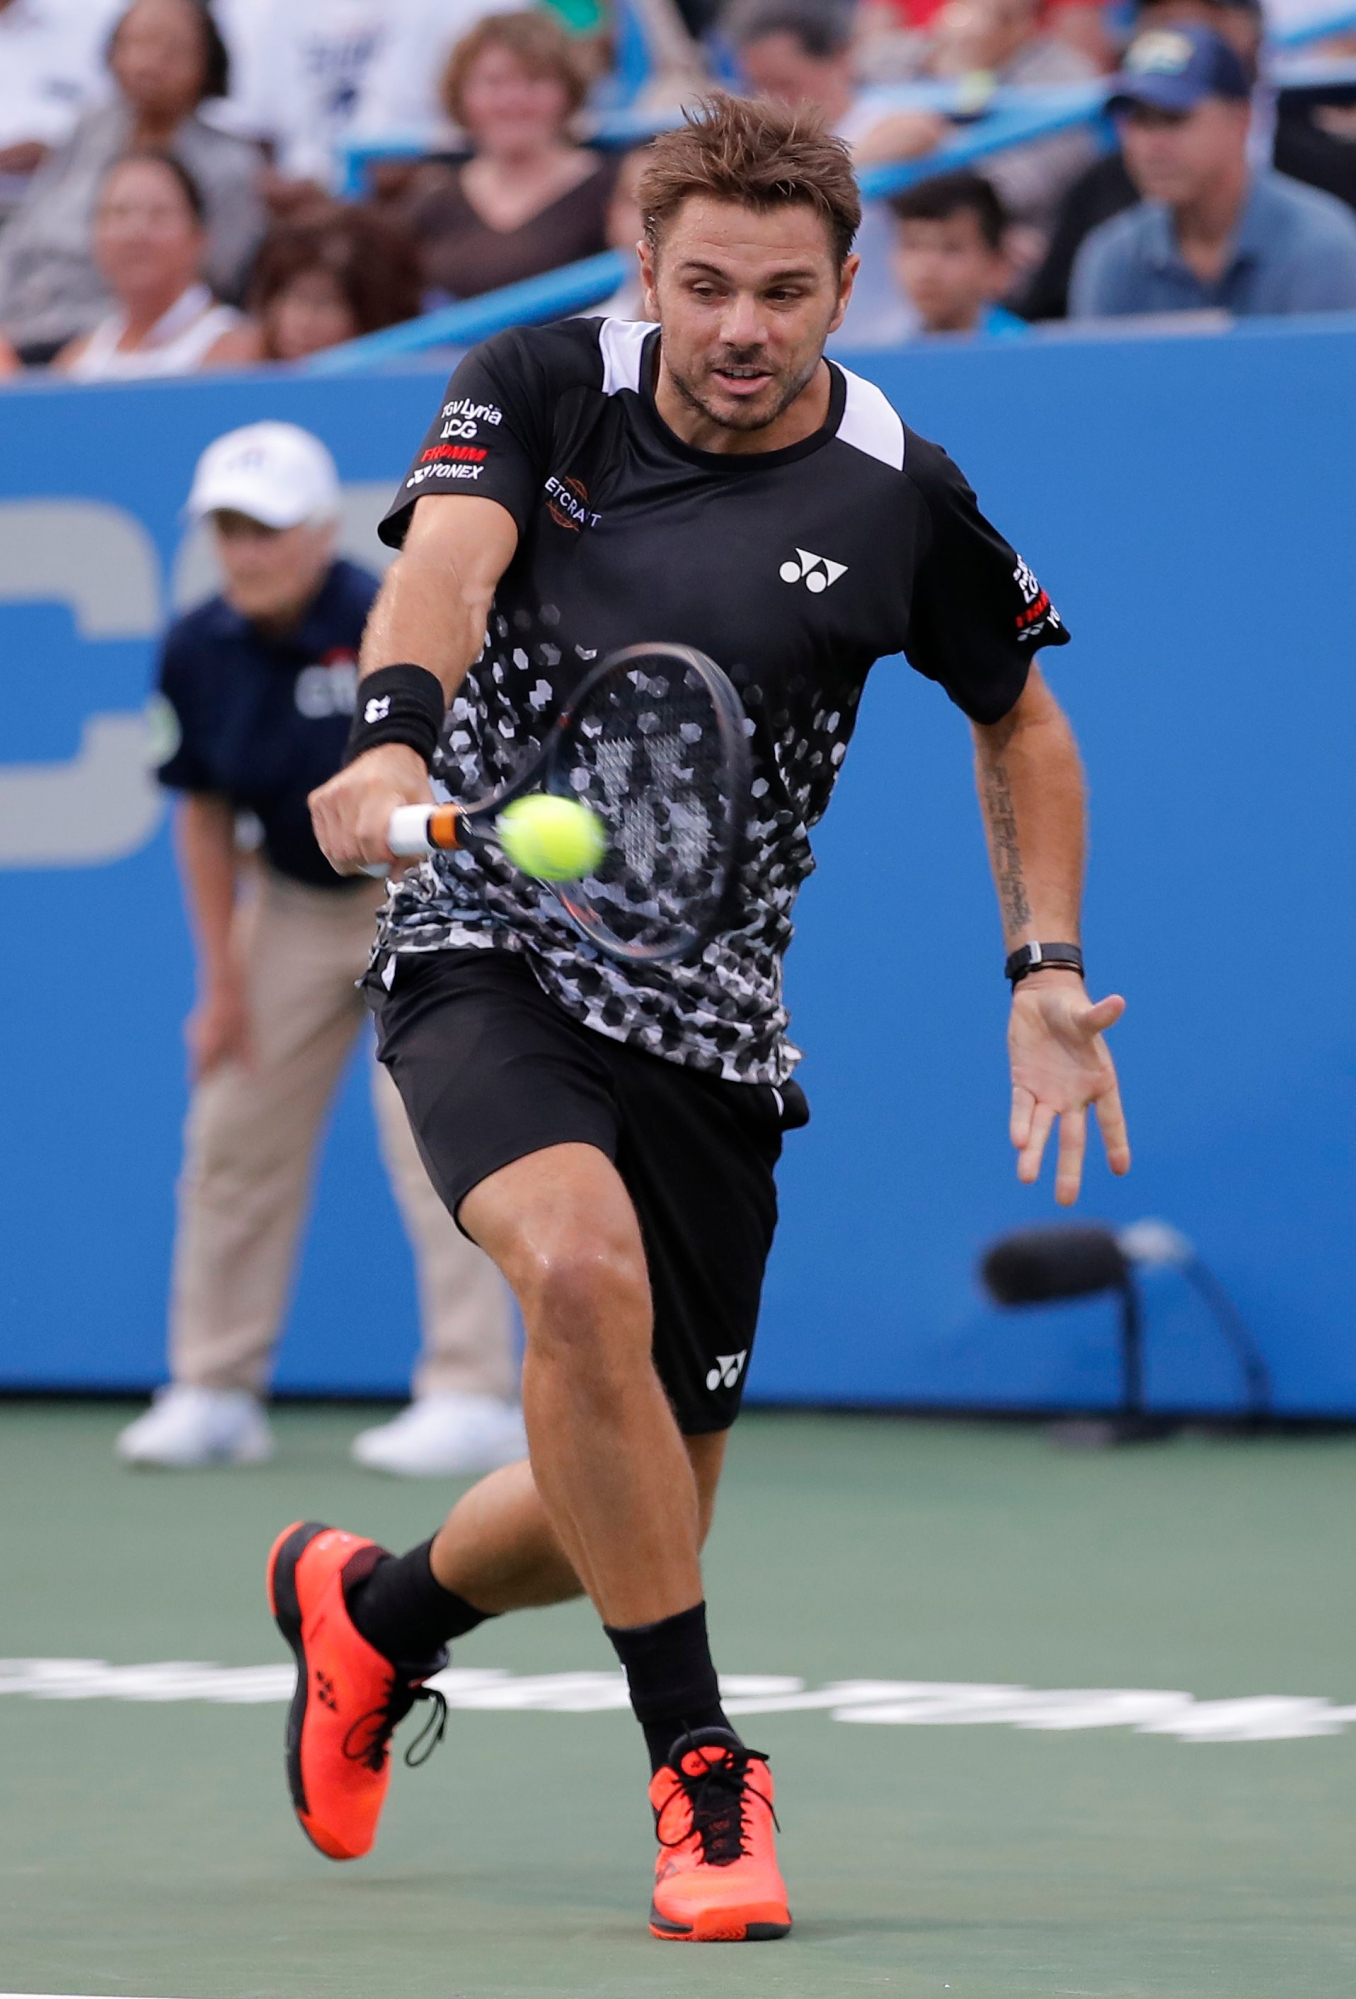 Stan Wawrinka, of Switzerland, returns to Donald Young, of the United States, during the Citi Open tennis tournament Tuesday, July 31, 2018, in Washington. Young won 6-4, 6-7 (5), 7-6 (3). (AP Photo/Carolyn Kaster) Washington Tennis